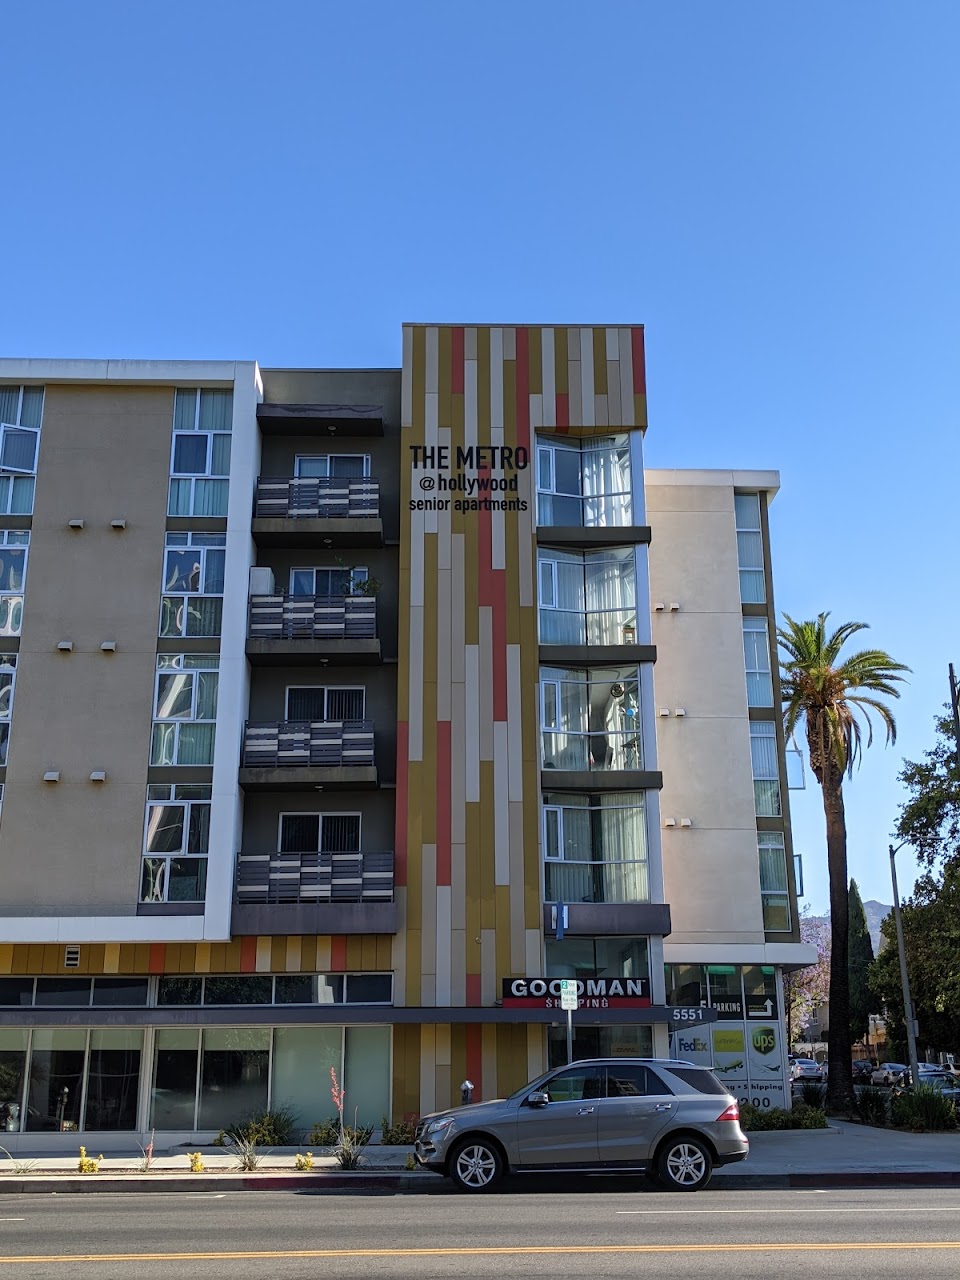 Photo of METRO AT HOLLYWOOD. Affordable housing located at 5555 HOLLYWOOD BLVD LOS ANGELES, CA 90028